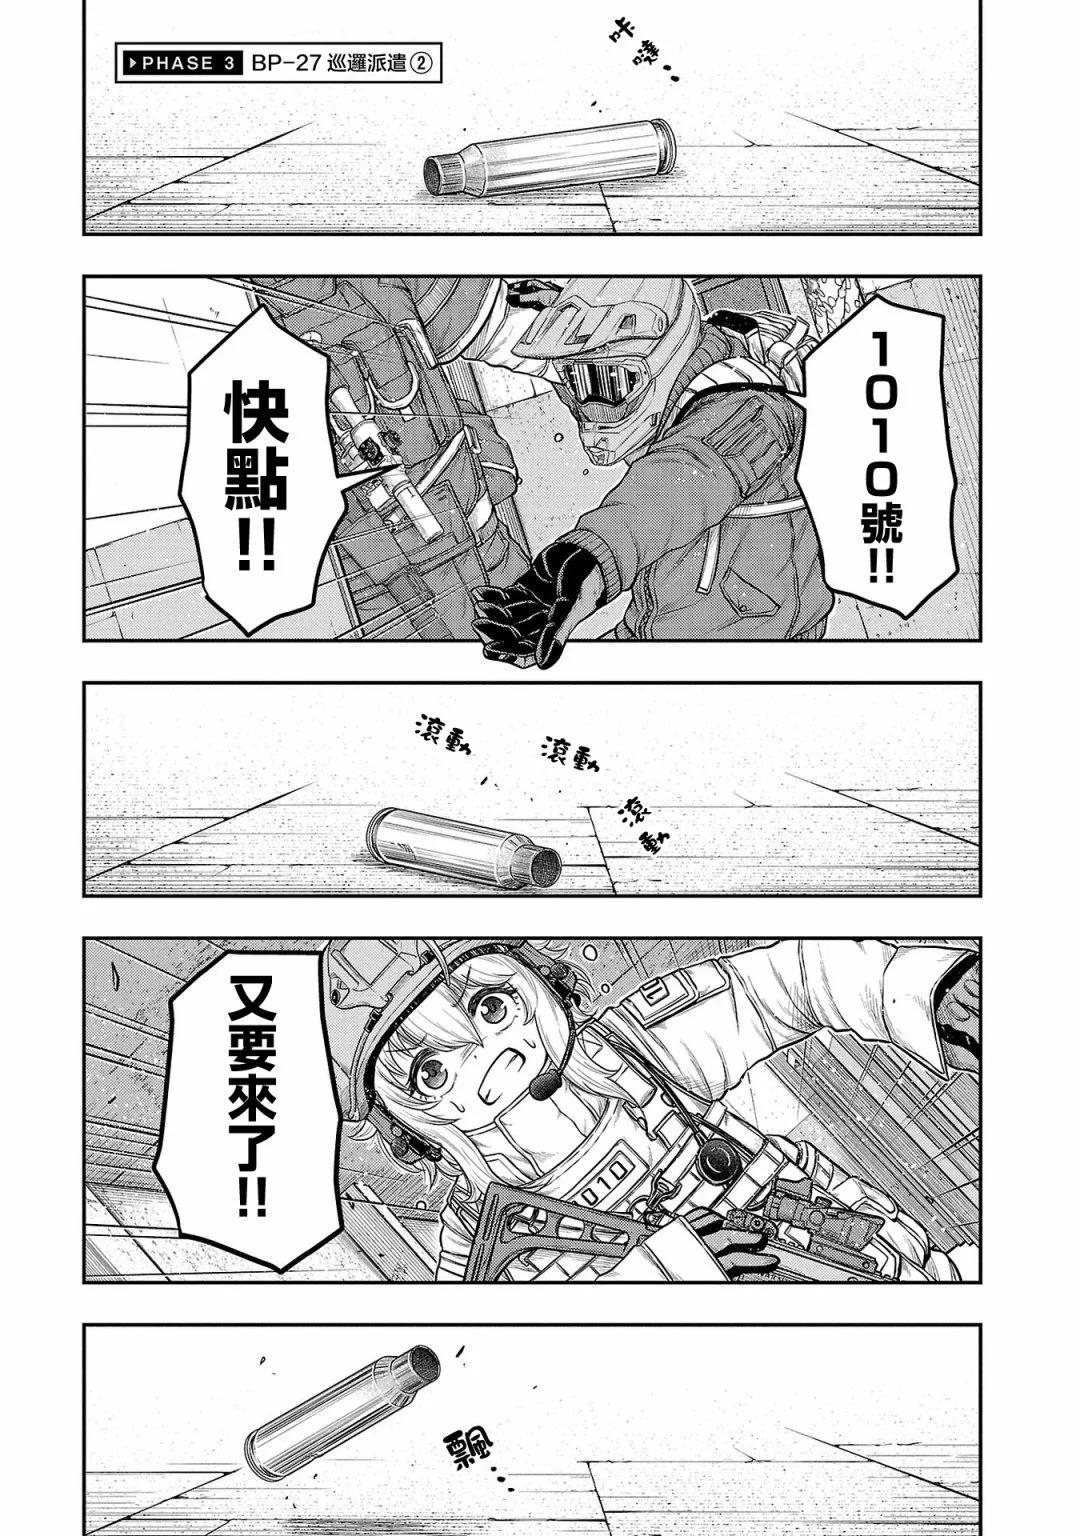 Scavengers Another Sky - 第03話 - 1